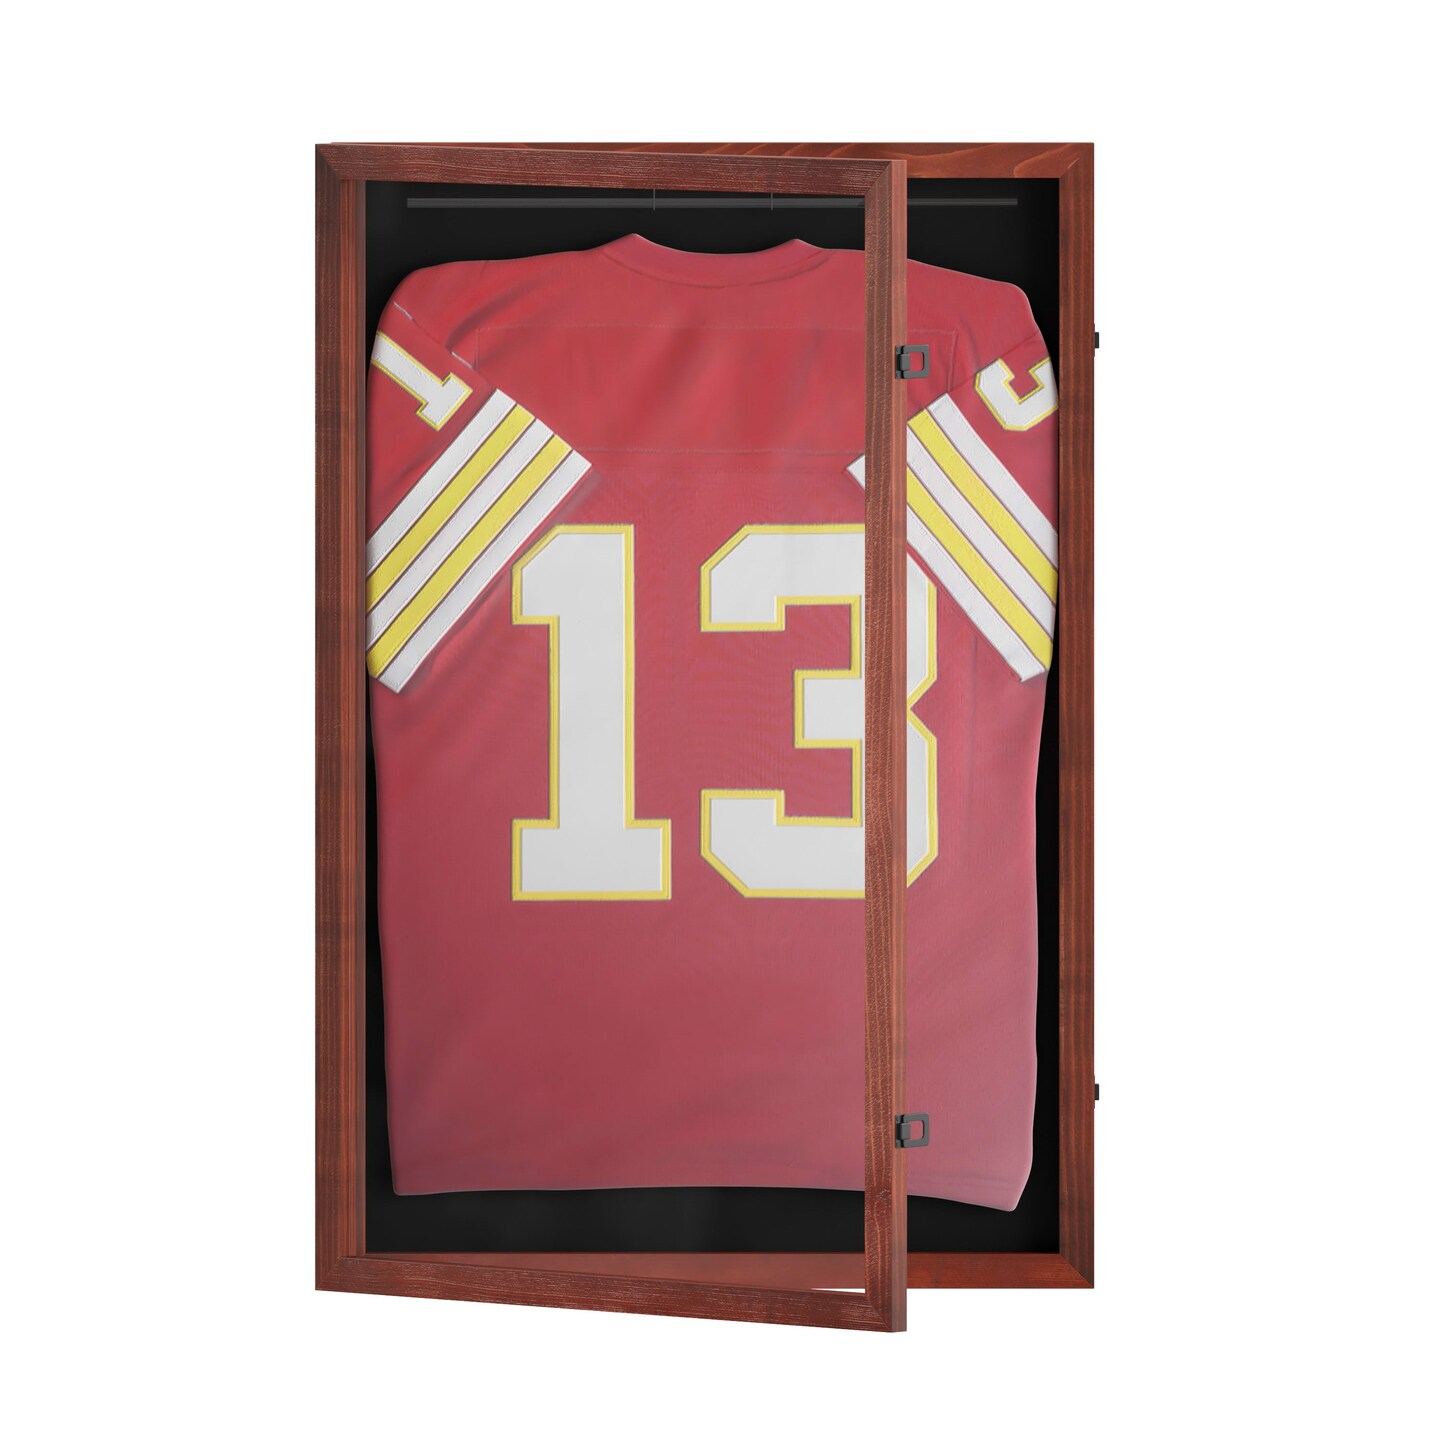 HBCY Creations Jersey Display Case - Solid Wood with Acrylic Window - Anti-Theft Lock with 2 Keys - For All Types of Jerseys